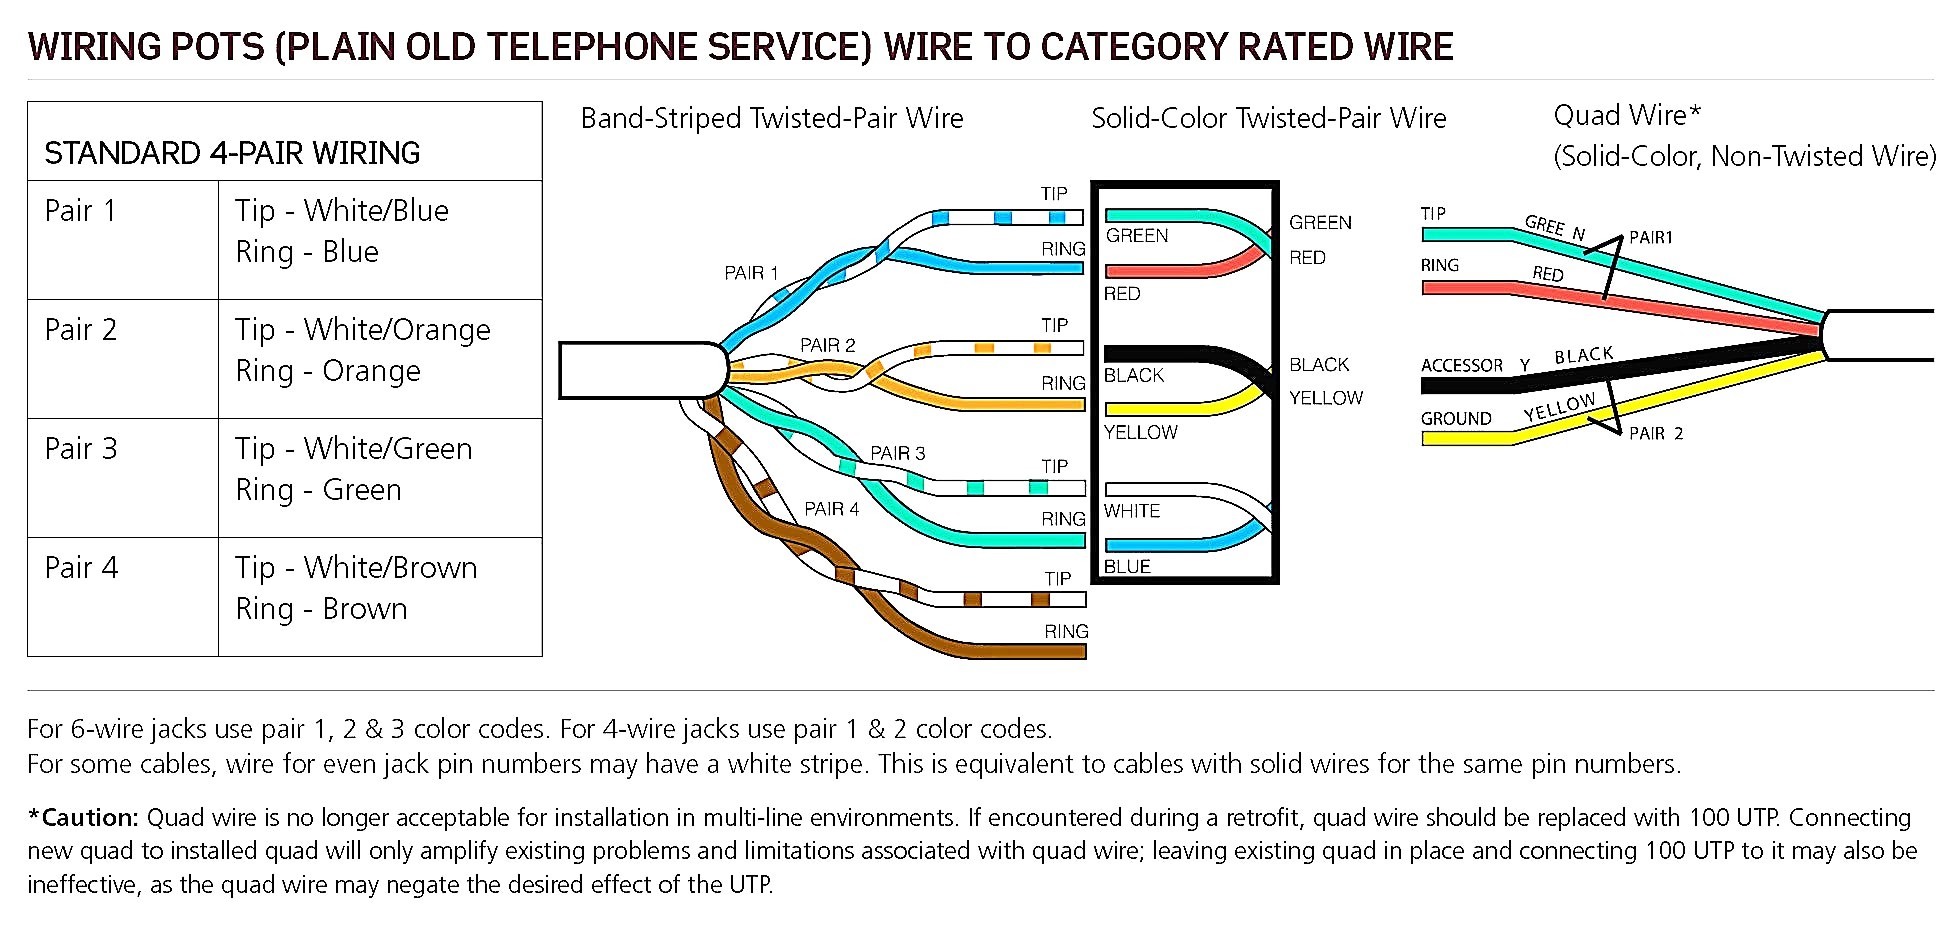 jack wiring to her with dsl telephone wiring diagram wiring wire rh daniablub co